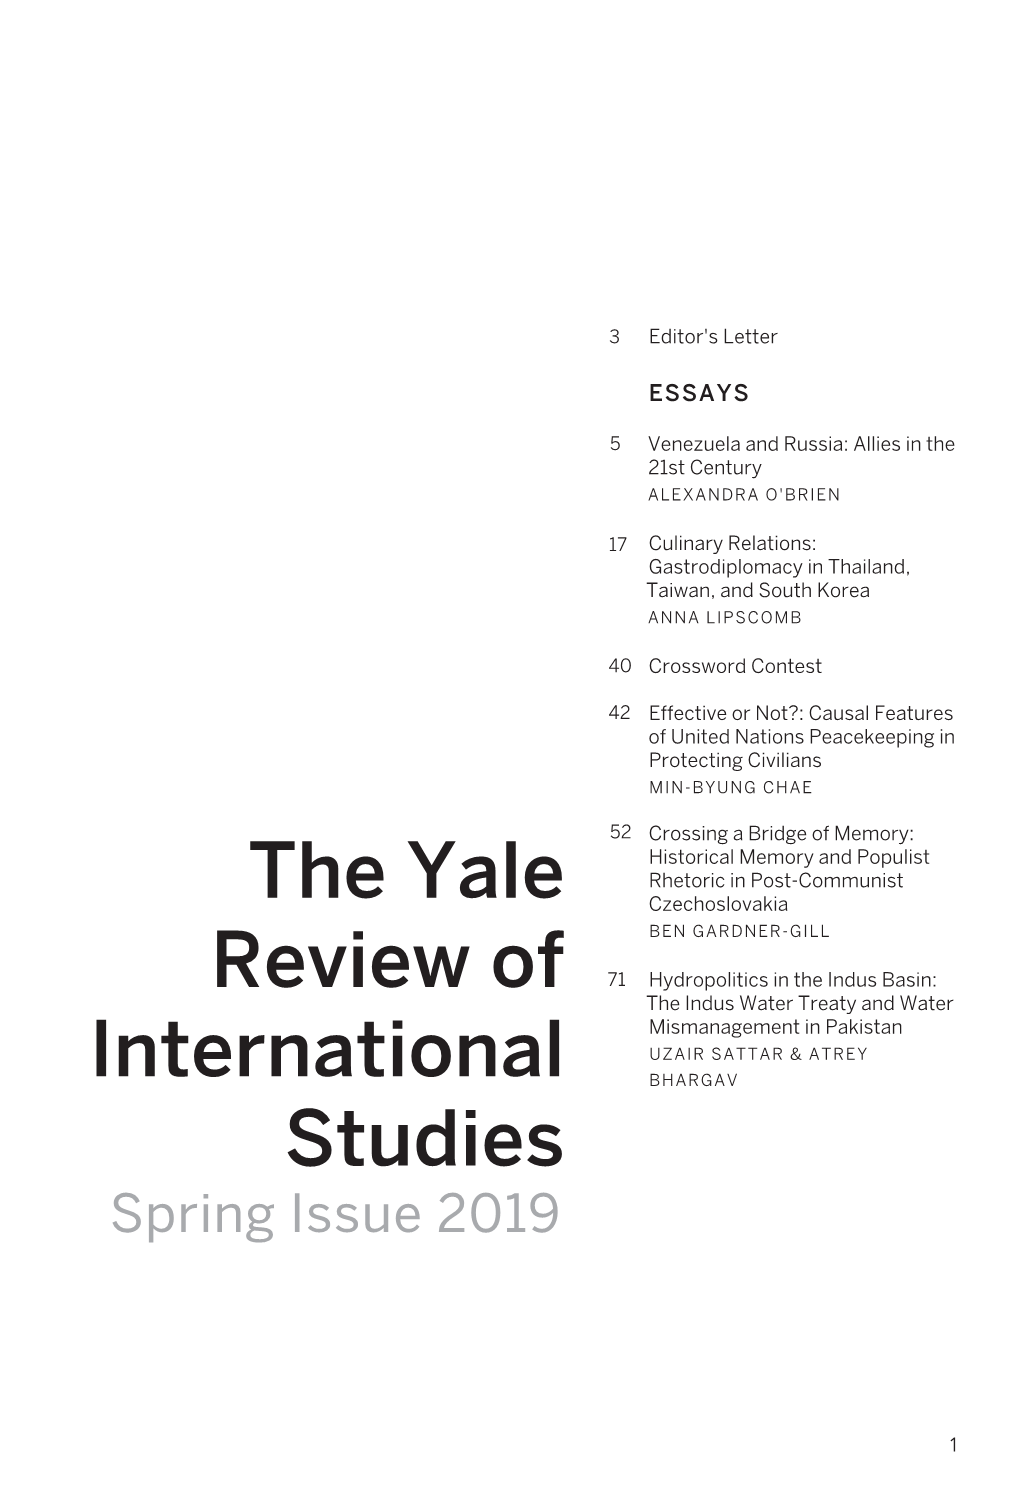 The Yale Review of International Studies Editorial Board Is Proud STAFF to Present to You Our Third Issue This Year: the Spring Issue 2019